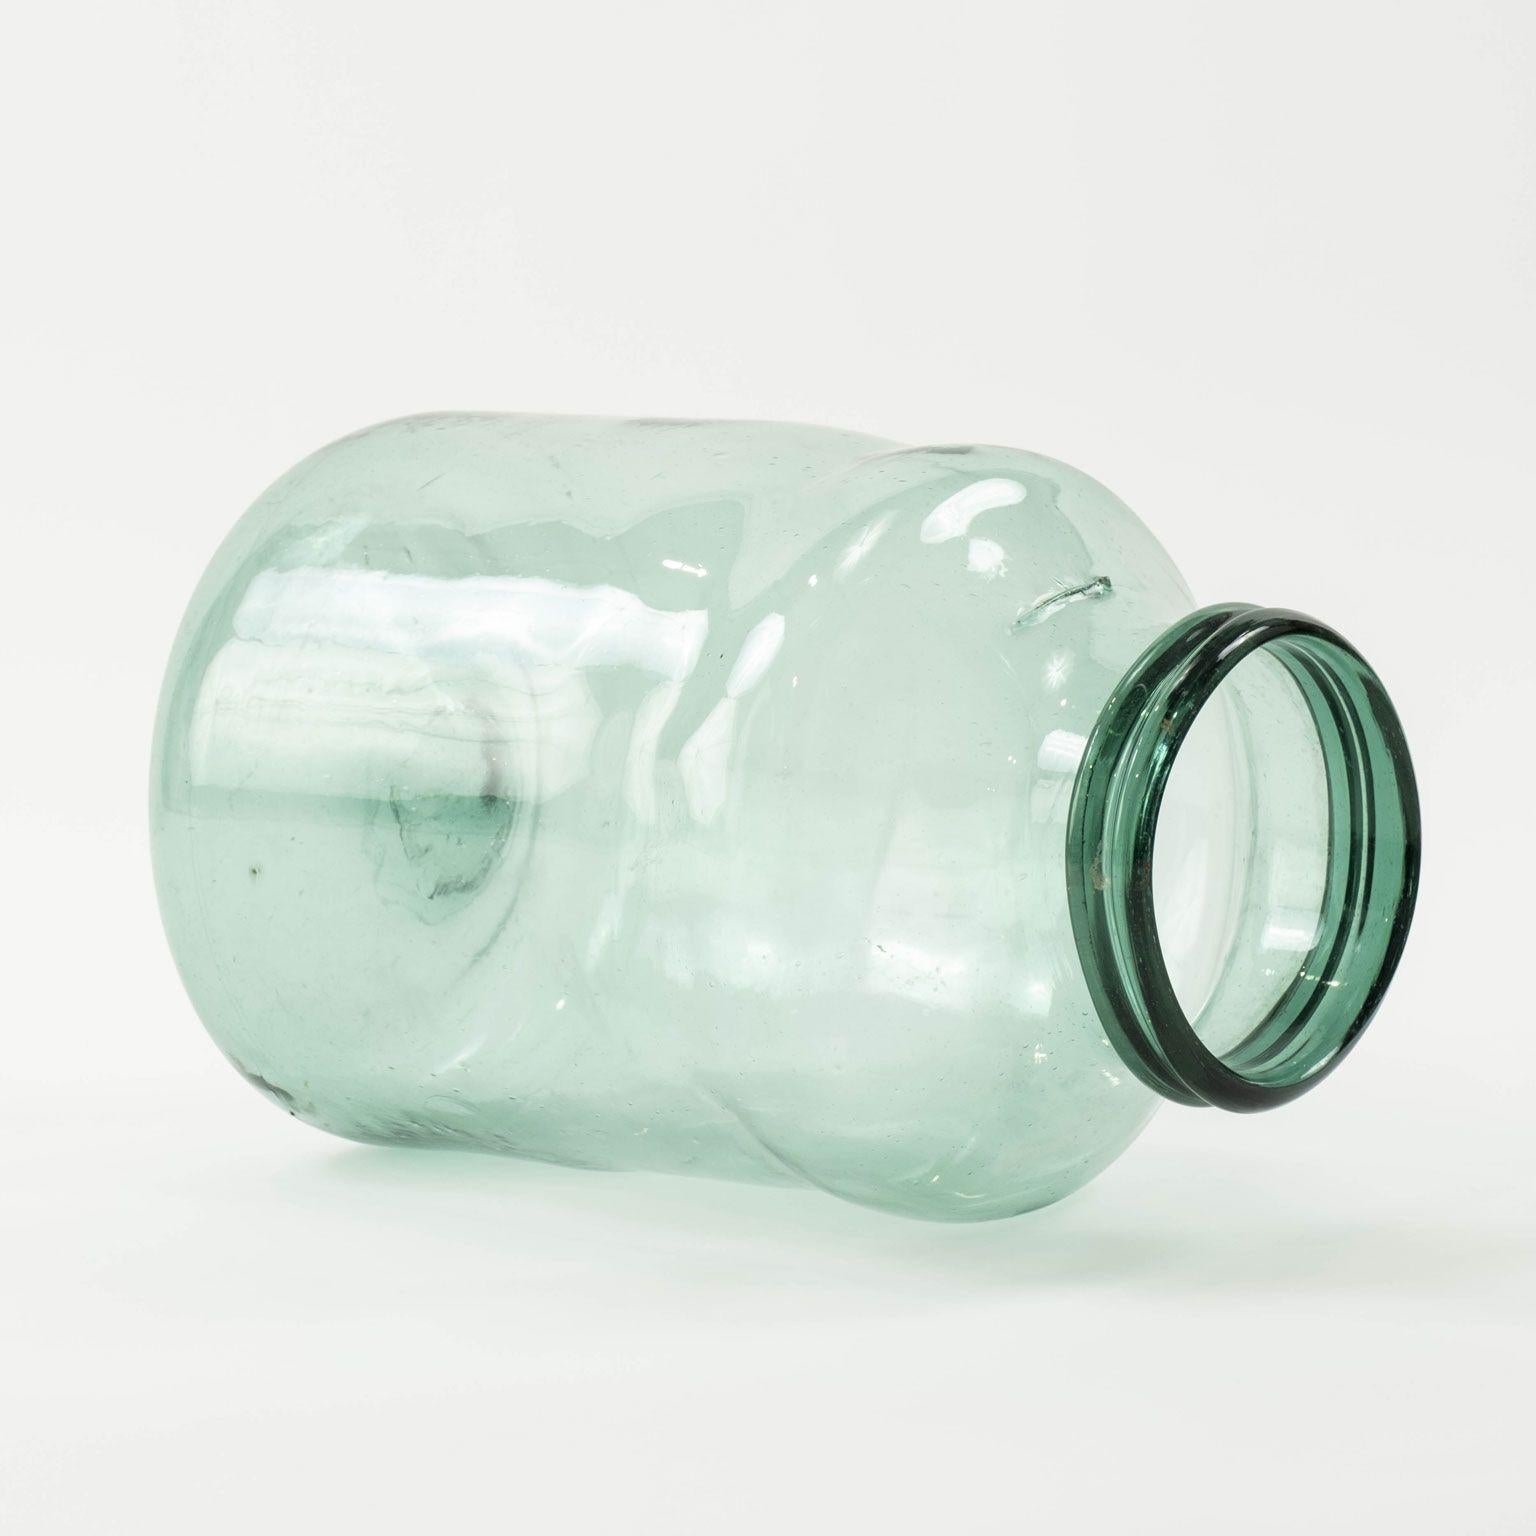 Hand-Crafted Large Hand-Blown Antique Glass Jar